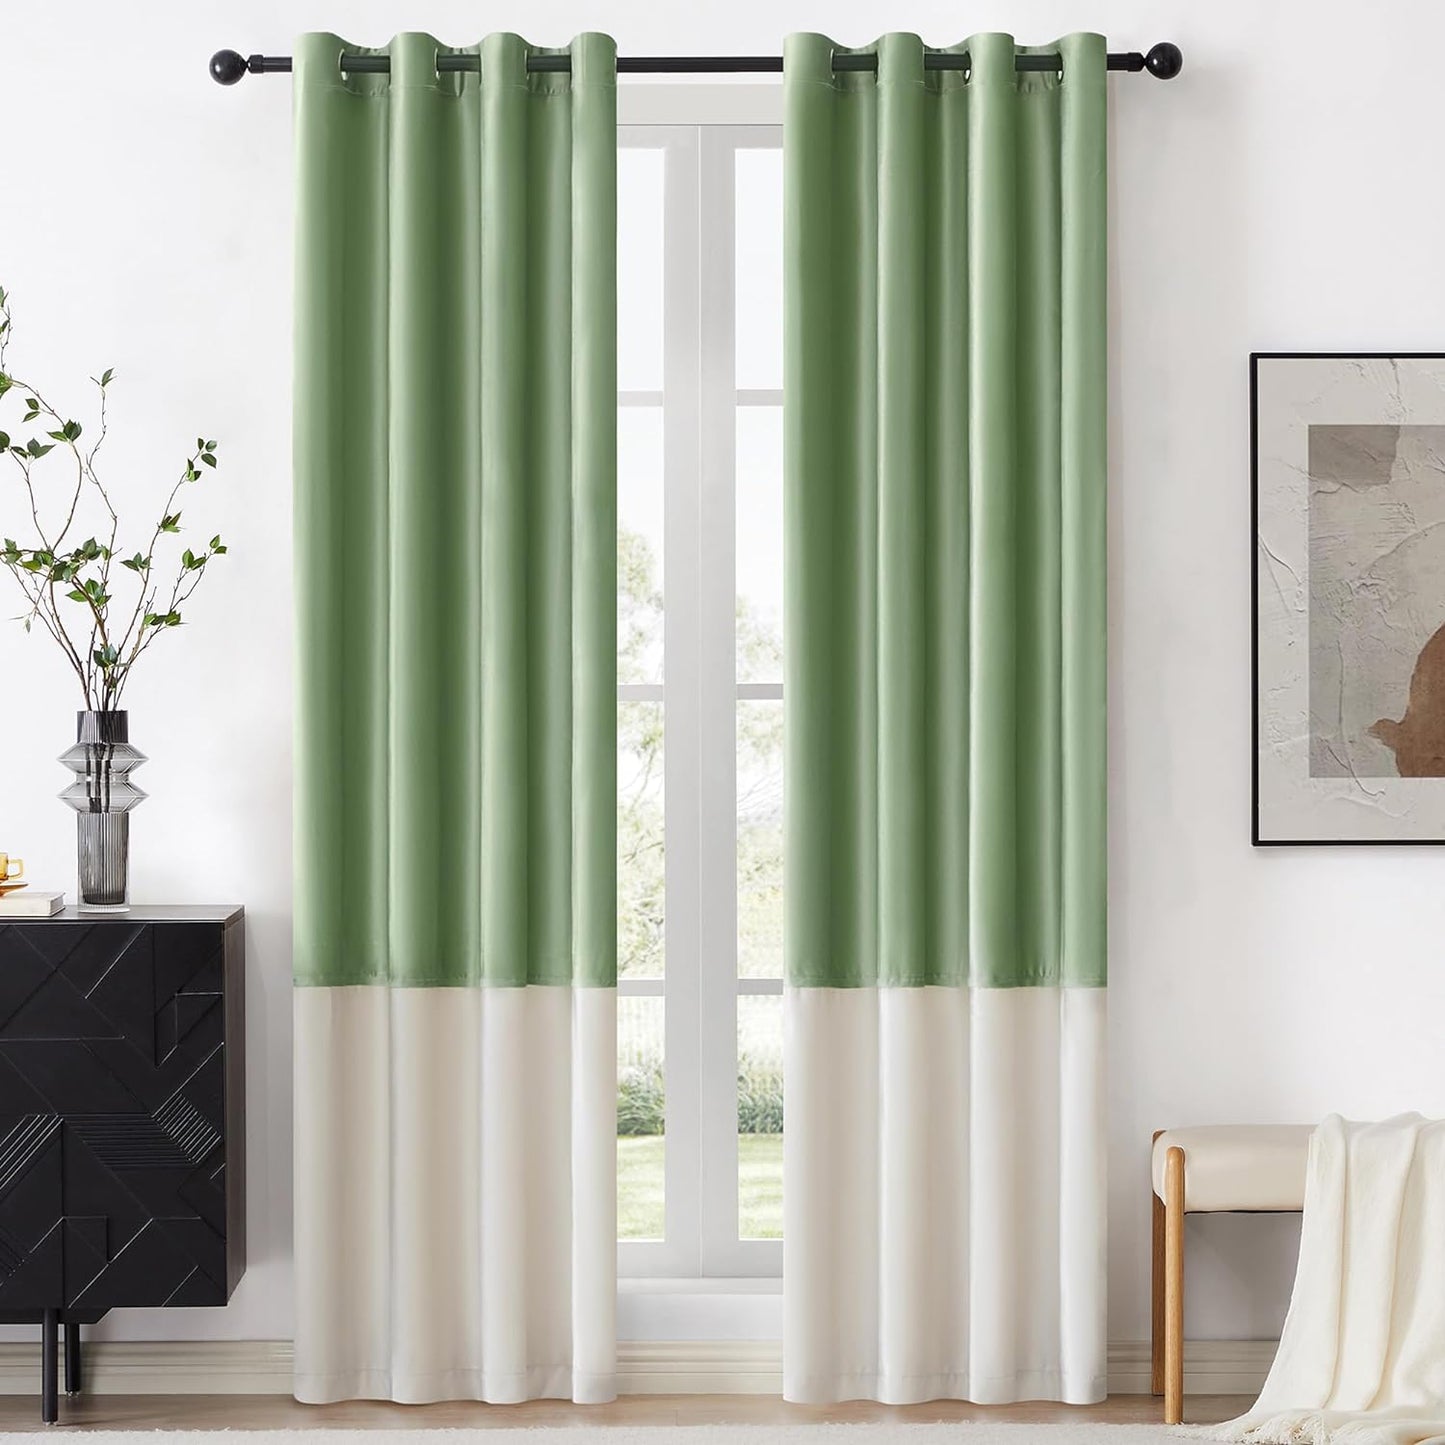 BULBUL Color Block Window Curtains Panels 84 Inches Long Cream Ivory Gold Velvet Farmhouse Drapes for Bedroom Living Room Darkening Treatment with Grommet Set of 2  BULBUL Sage Green  Cream 52"W X 84"L 